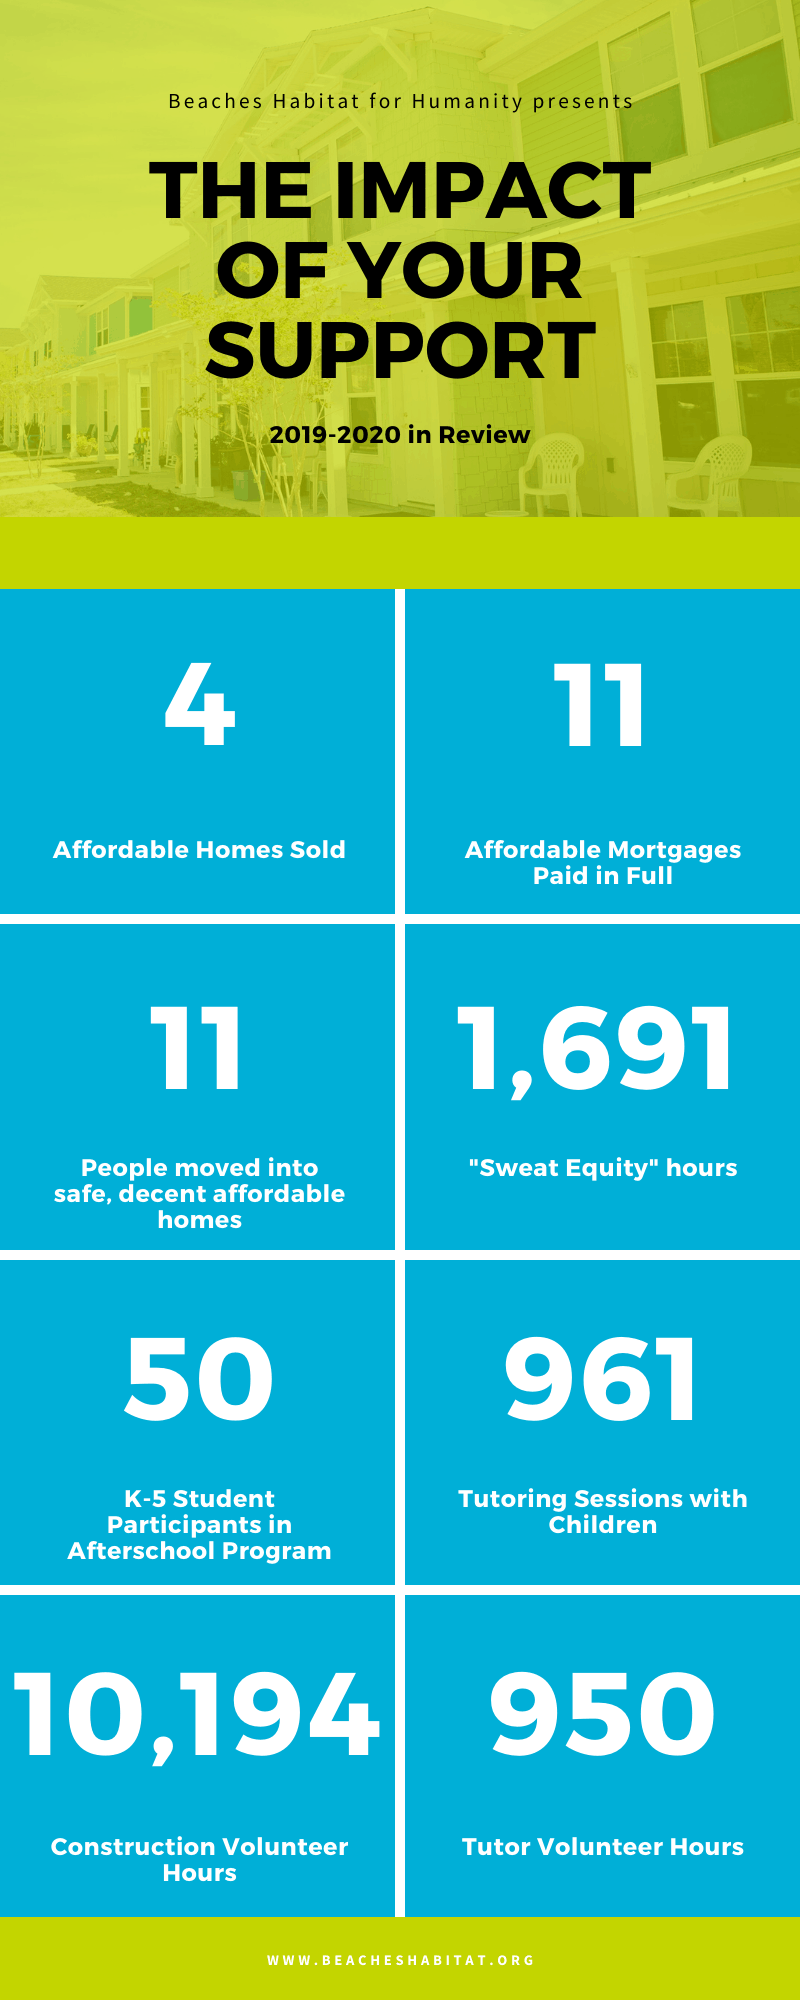 Year in Review, 2019-2020 | Beaches Habitat for Humanity